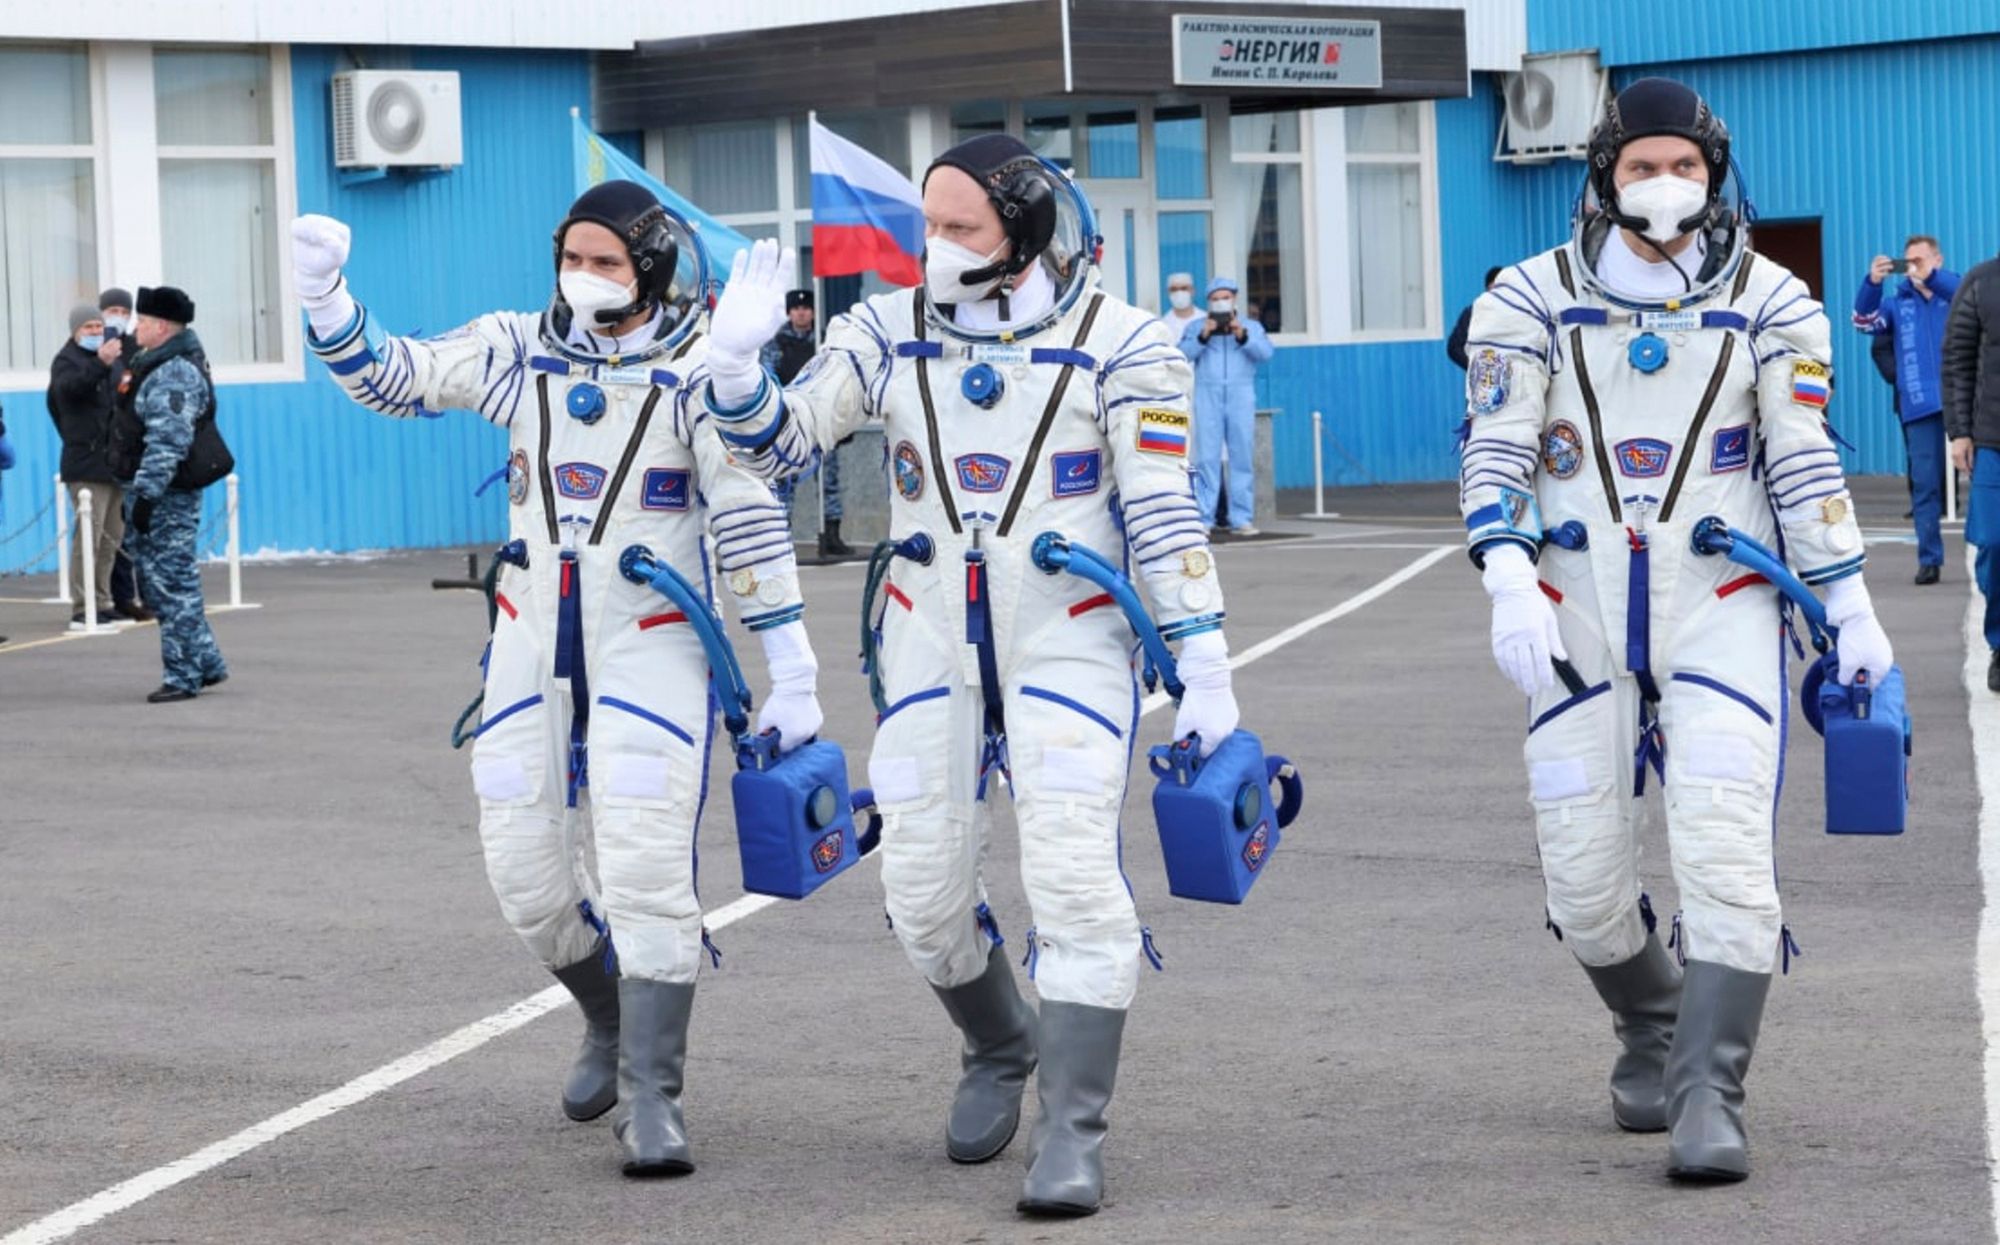 Russia’s leaving the ISS after 2024